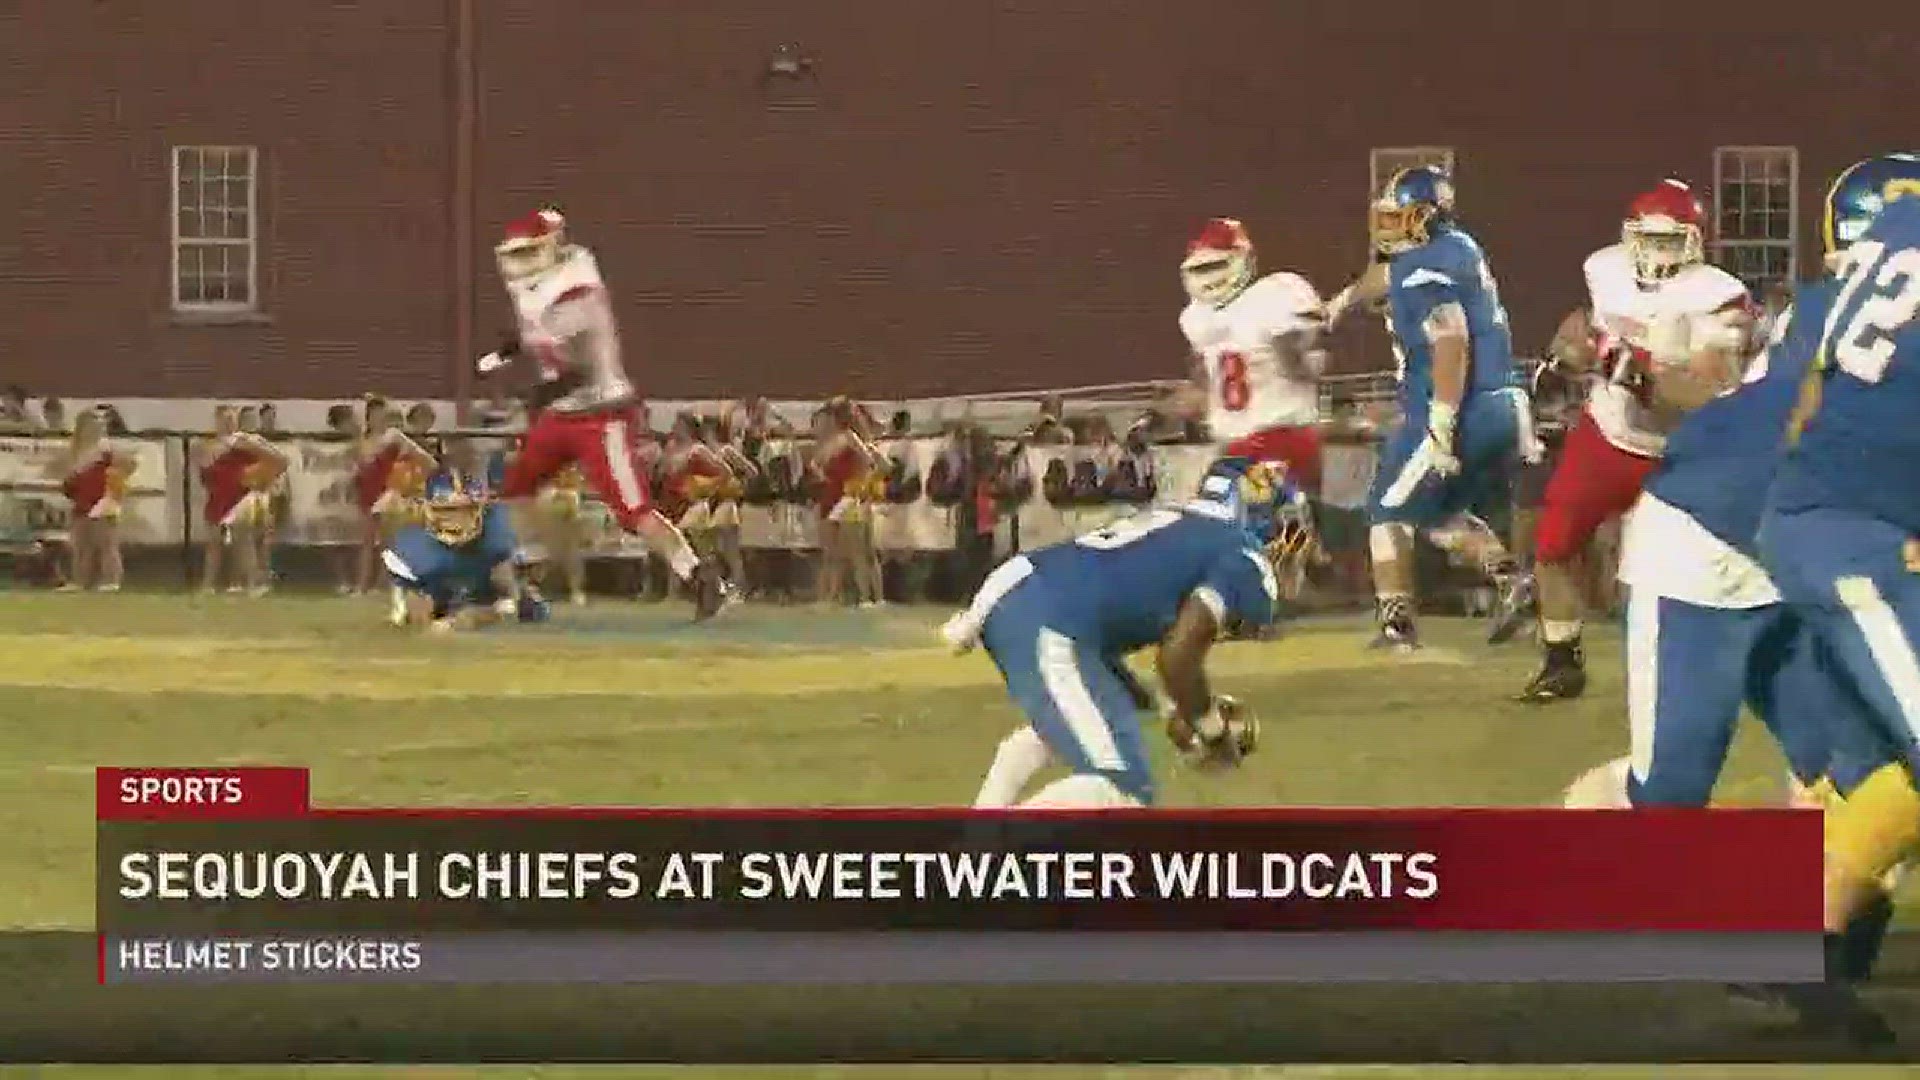 Sweetwater makes use of two quarterbacks in its win over Sequoyah